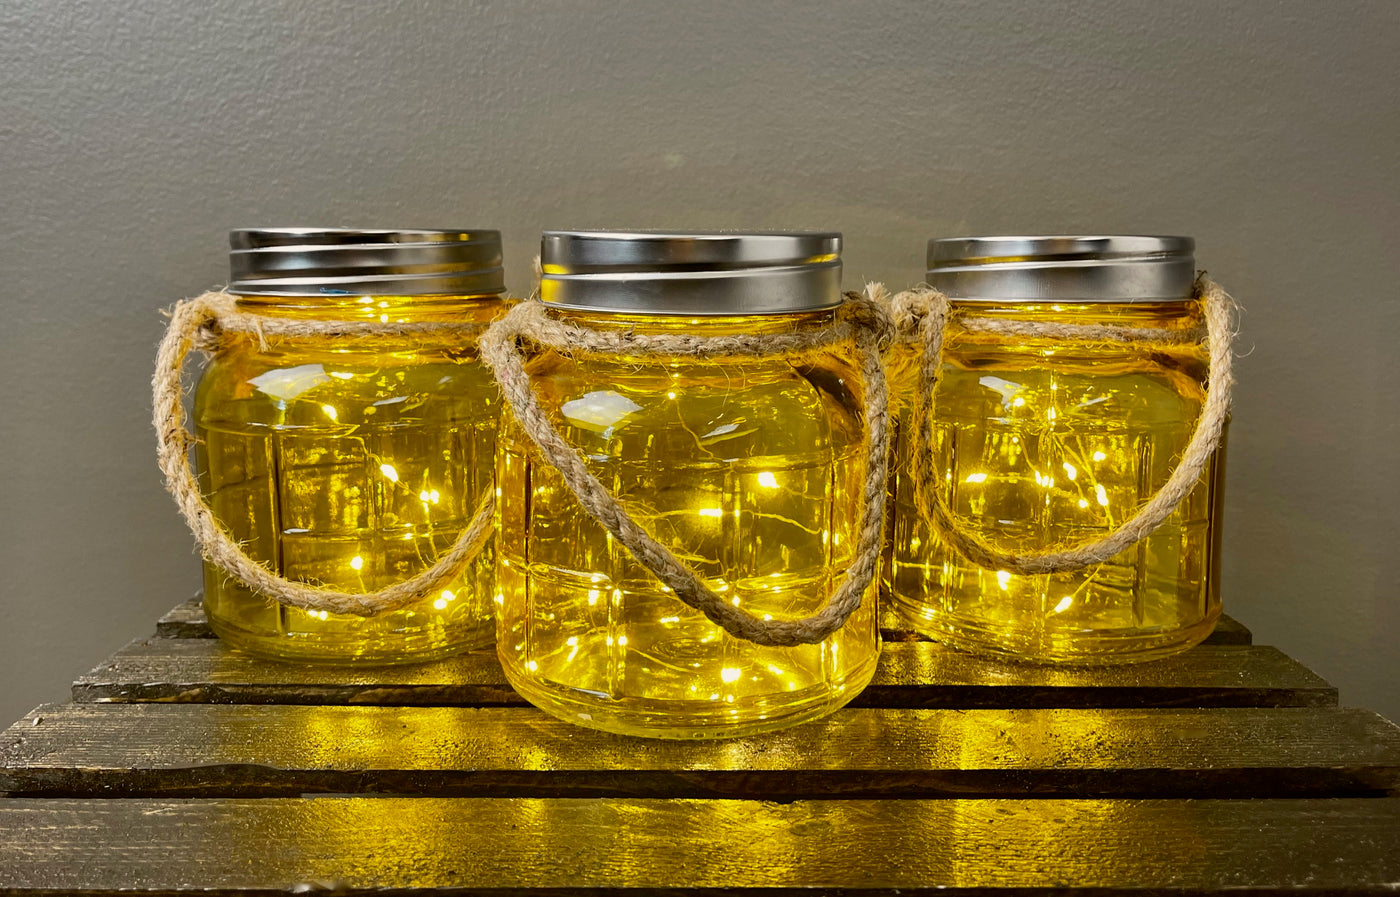 Six inch tall x 5 inch wide yellow mason jars equipped with fairy lights. Rent for $2.00 each.